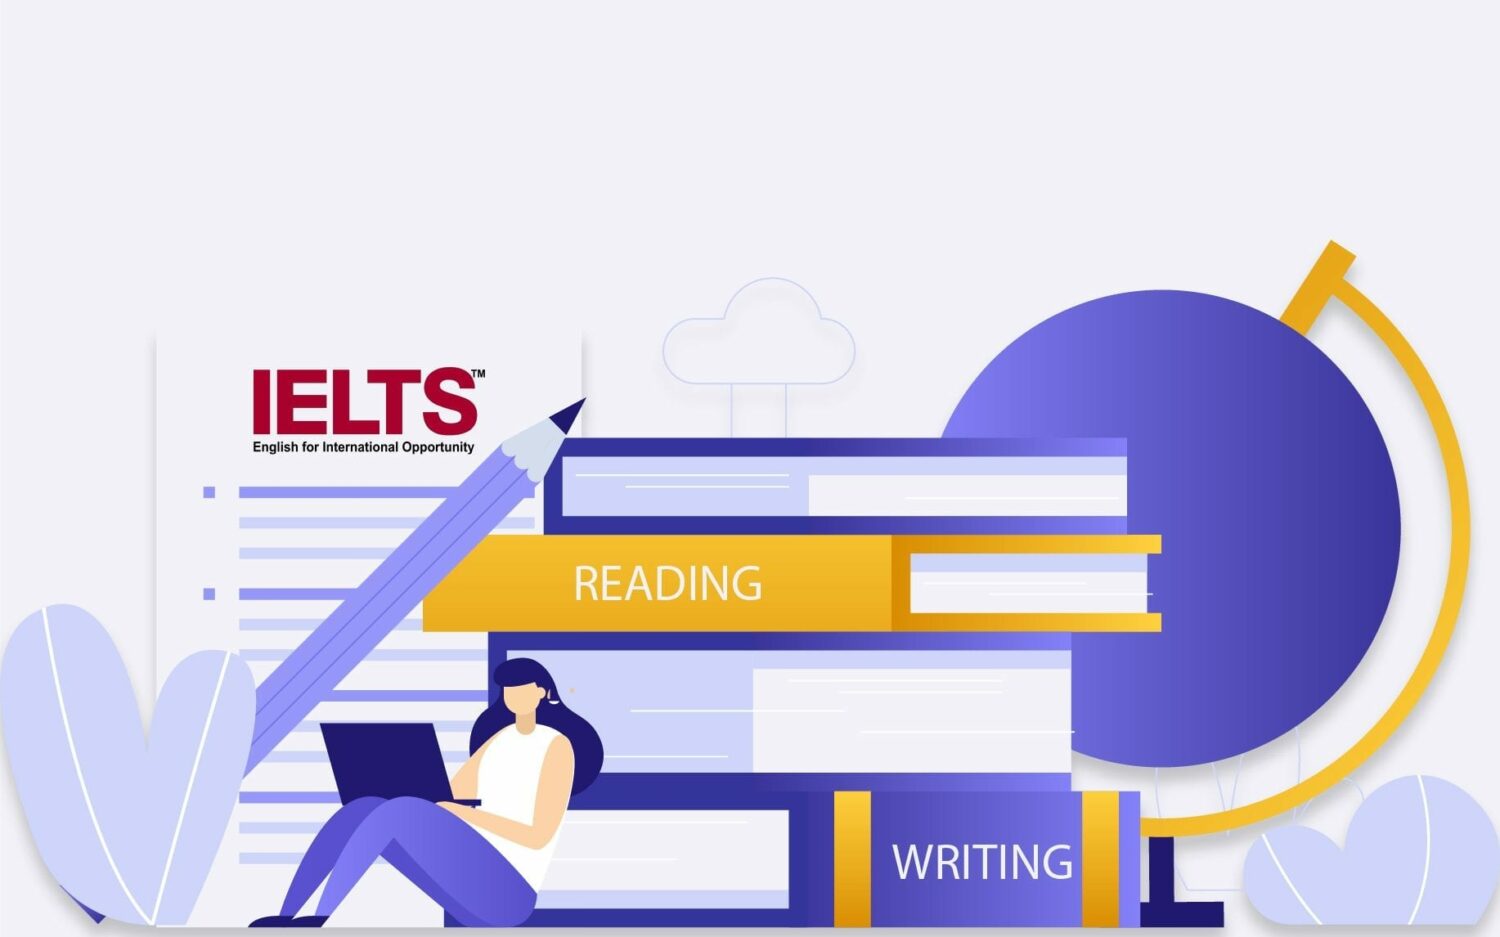 How to prepare for IELTS exam